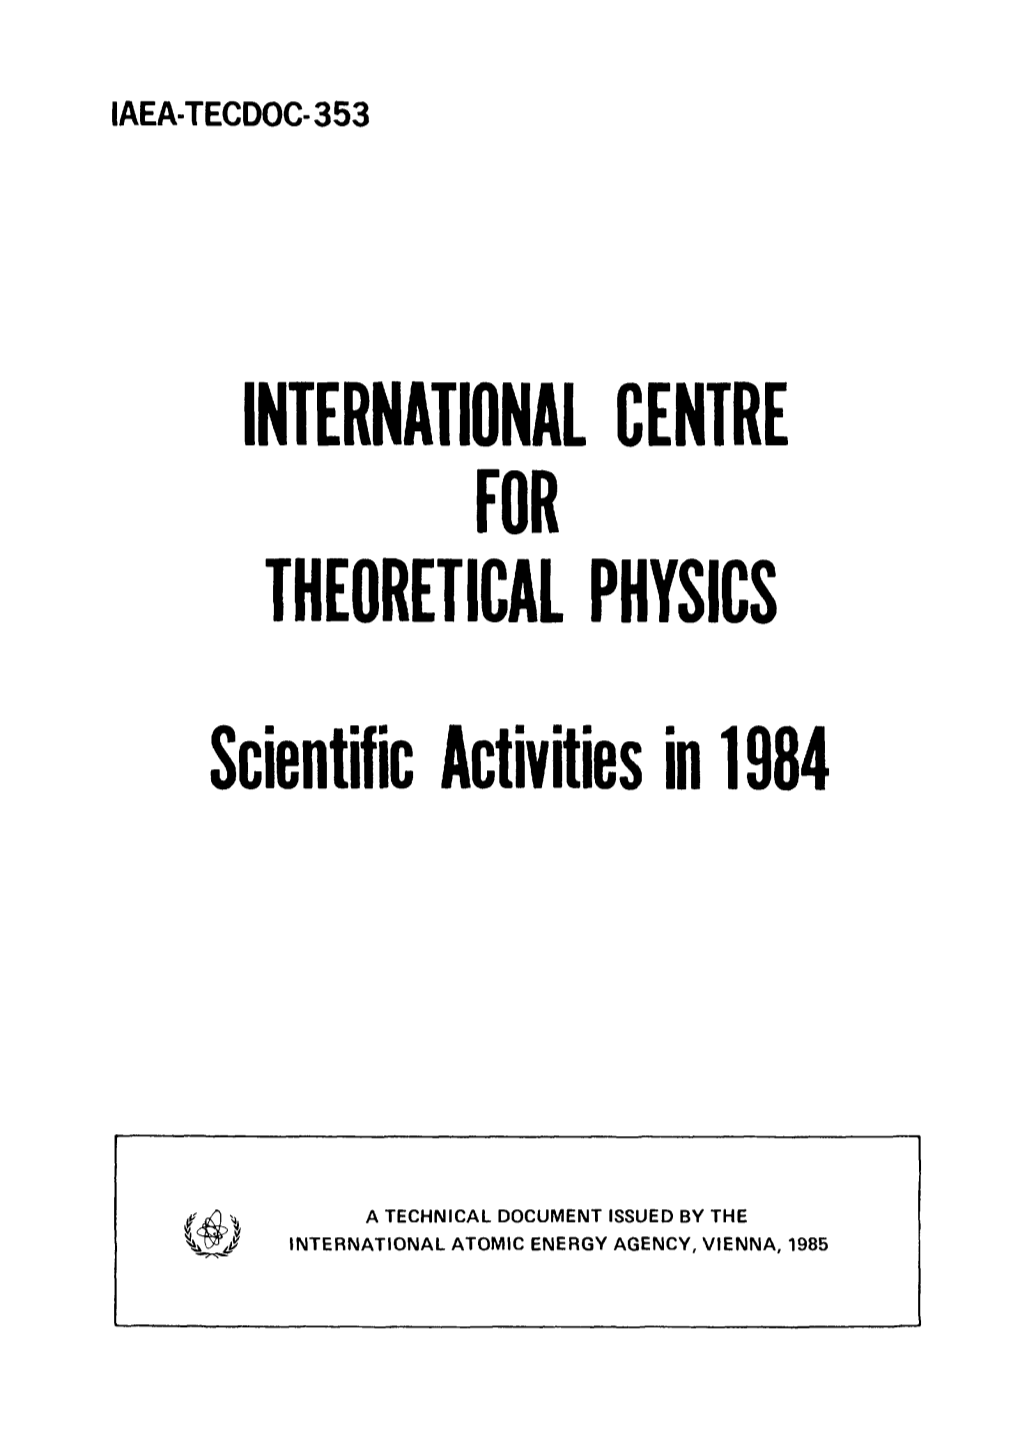 INTERNATIONAL CENTRE for THEORETICAL PHYSICS Scientific Activitie 198N Si 4